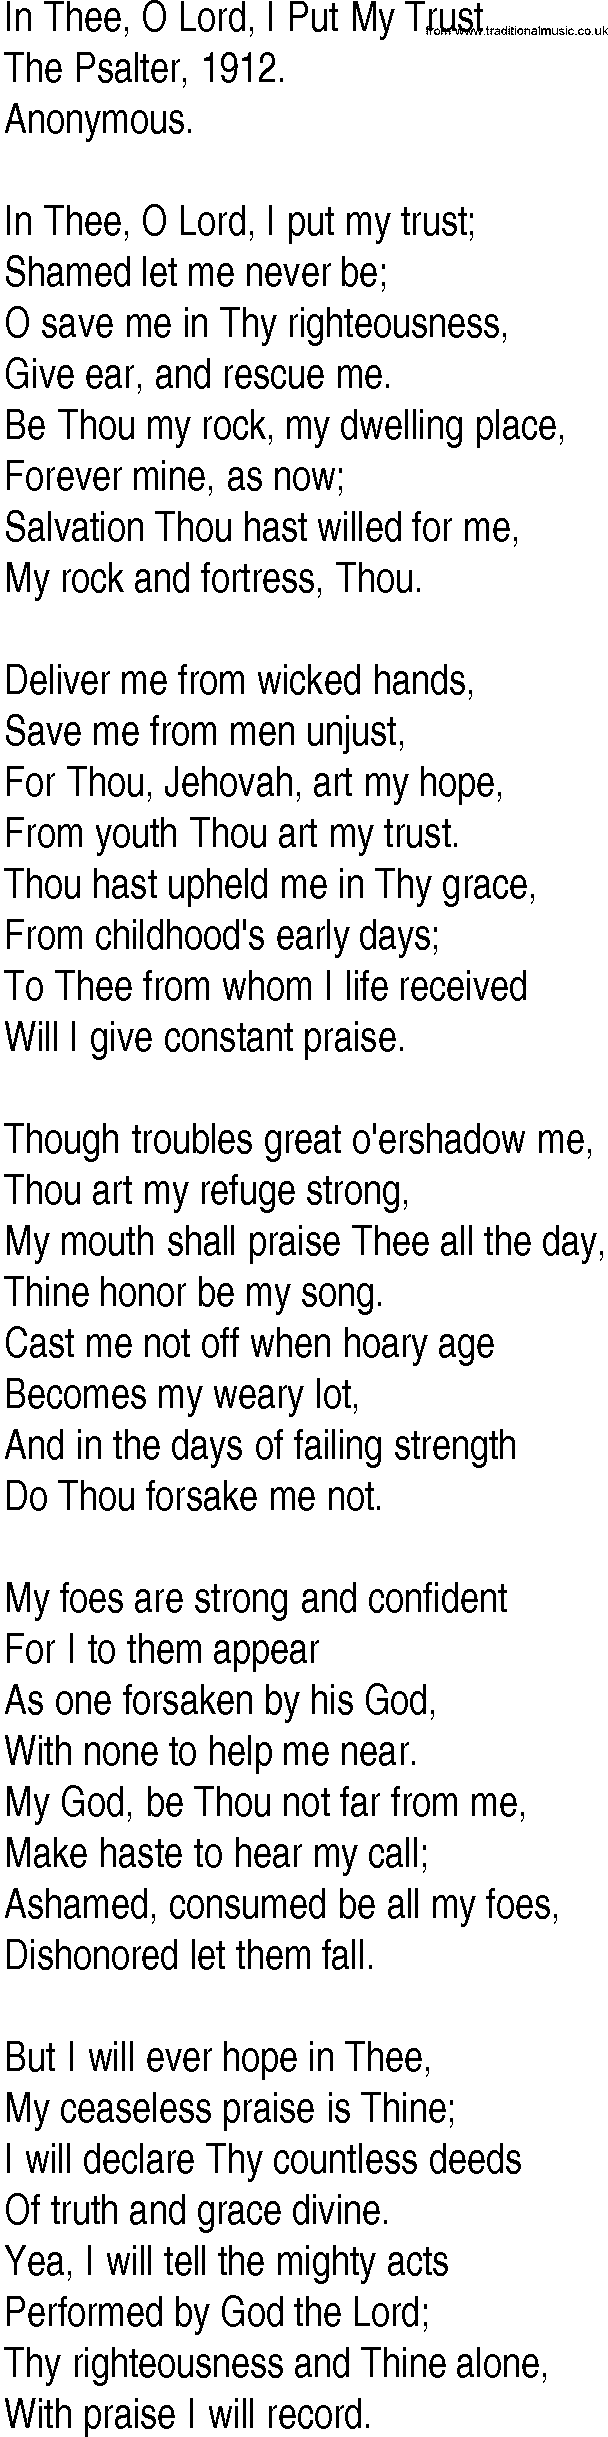 Hymn and Gospel Song: In Thee, O Lord, I Put My Trust by The Psalter 71 lyrics